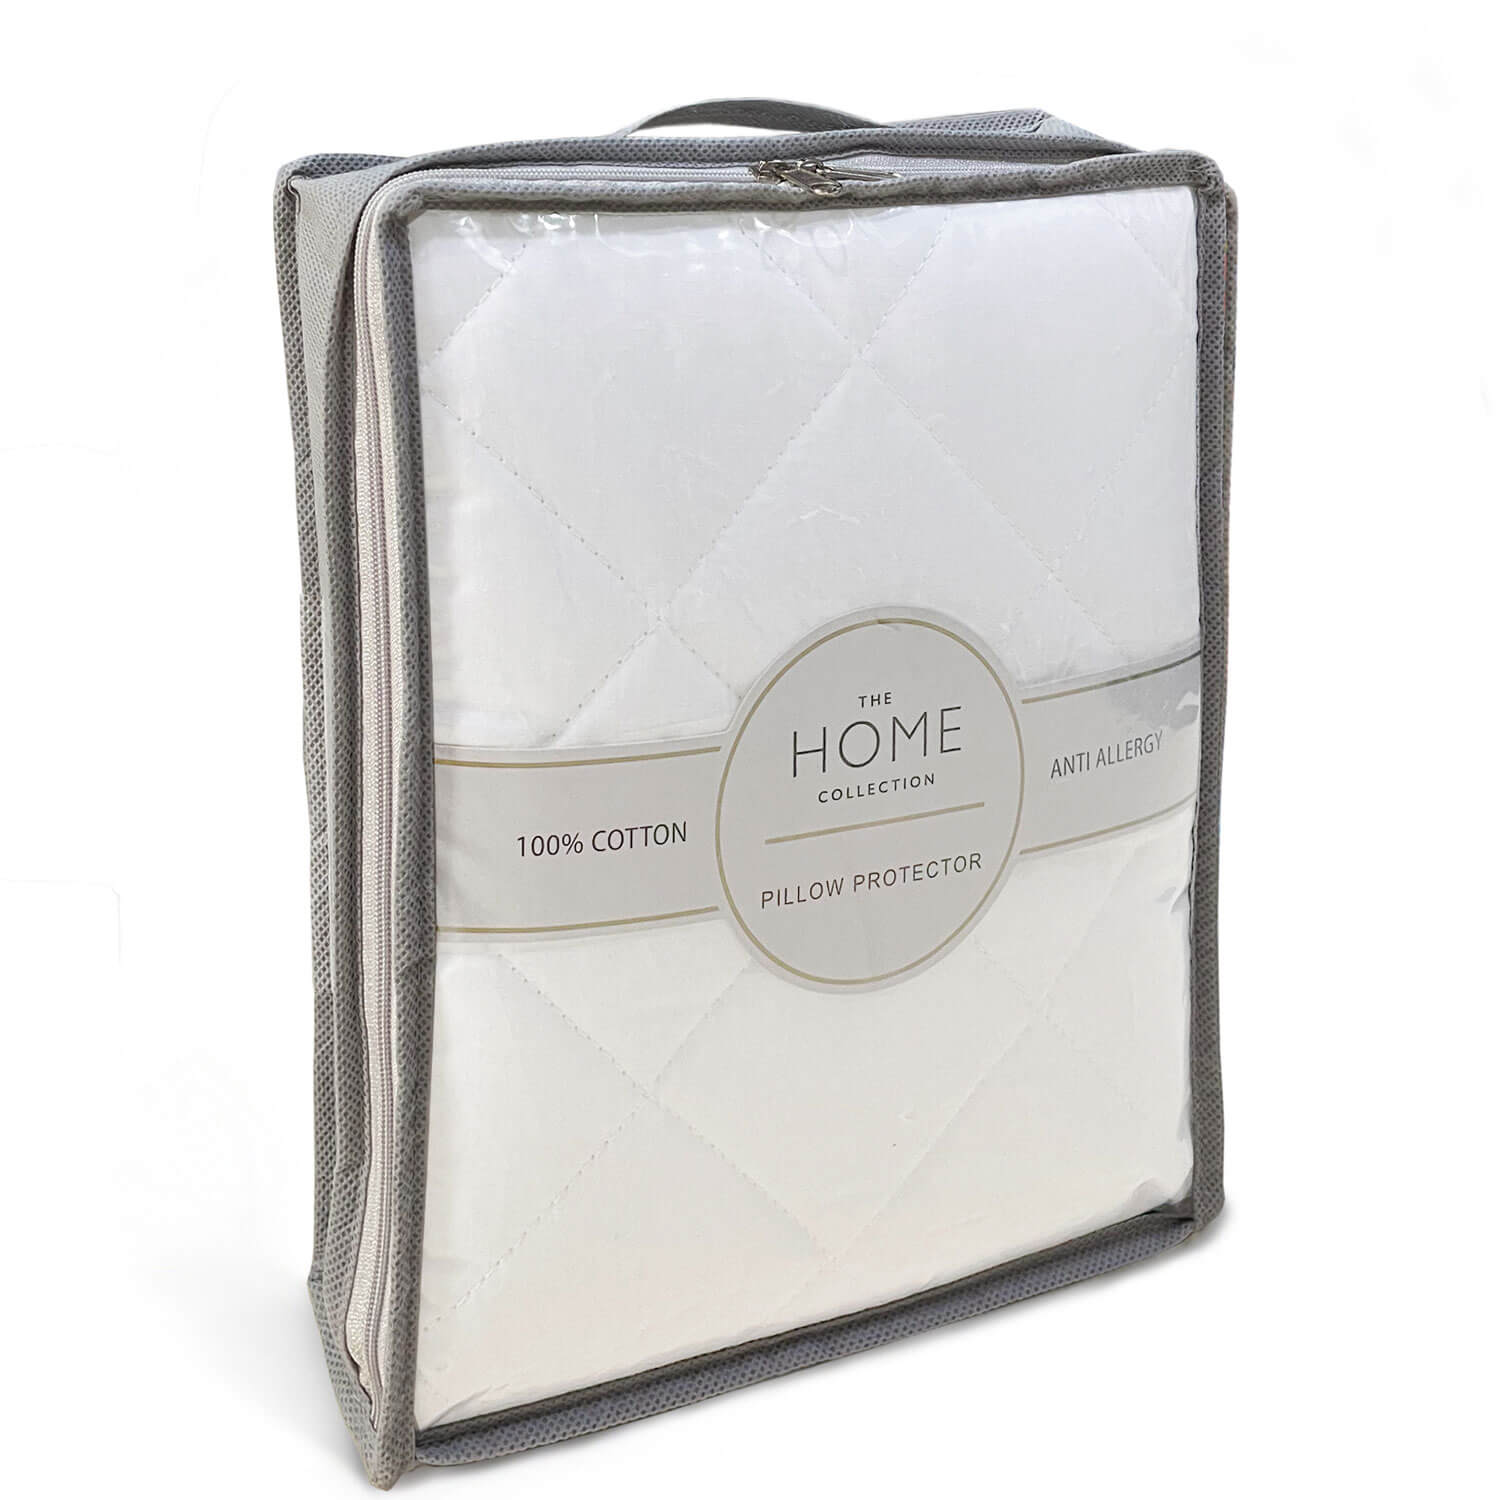 The Home Collection Anti-Allergy Pillow Protector - White 1 Shaws Department Stores